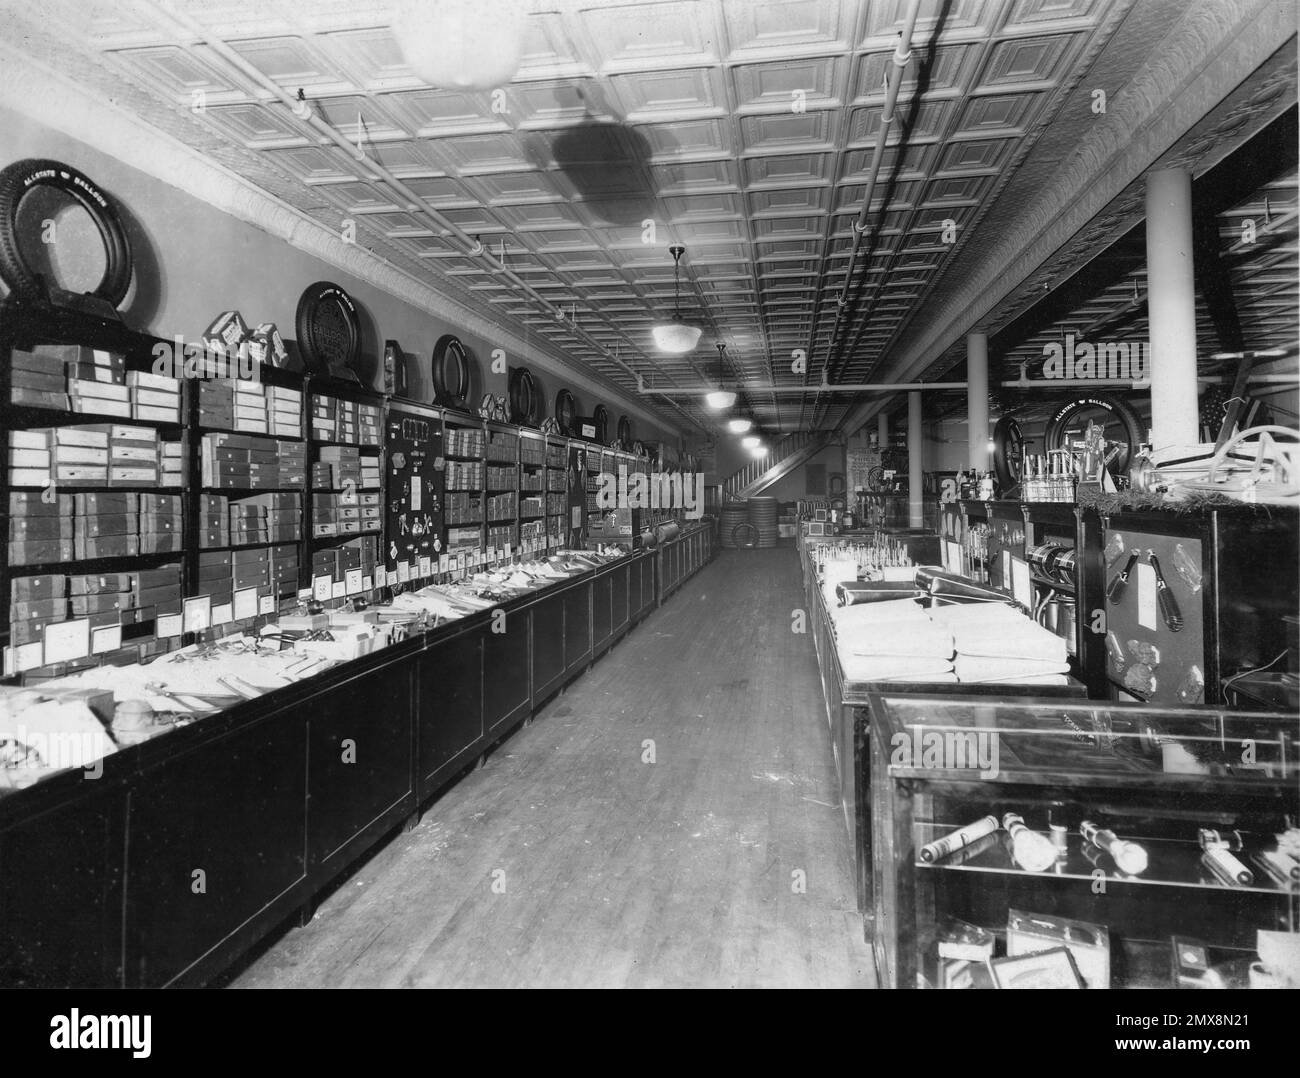 Sears and Roebuck 1900s, Old Sears Store Interior Stock Photo